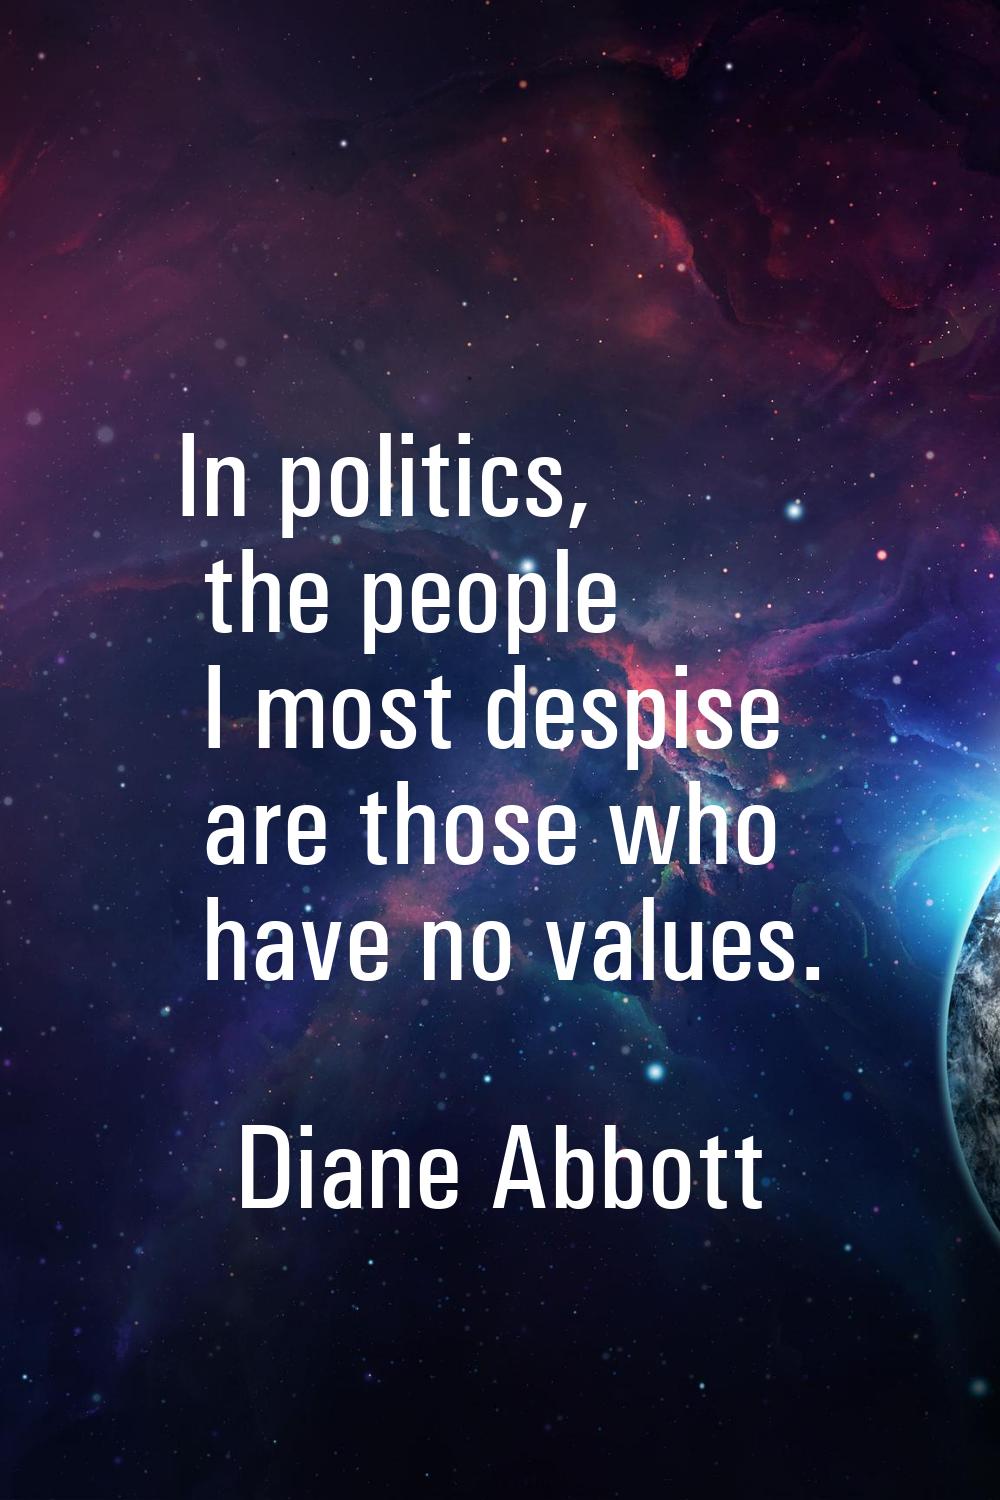 In politics, the people I most despise are those who have no values.